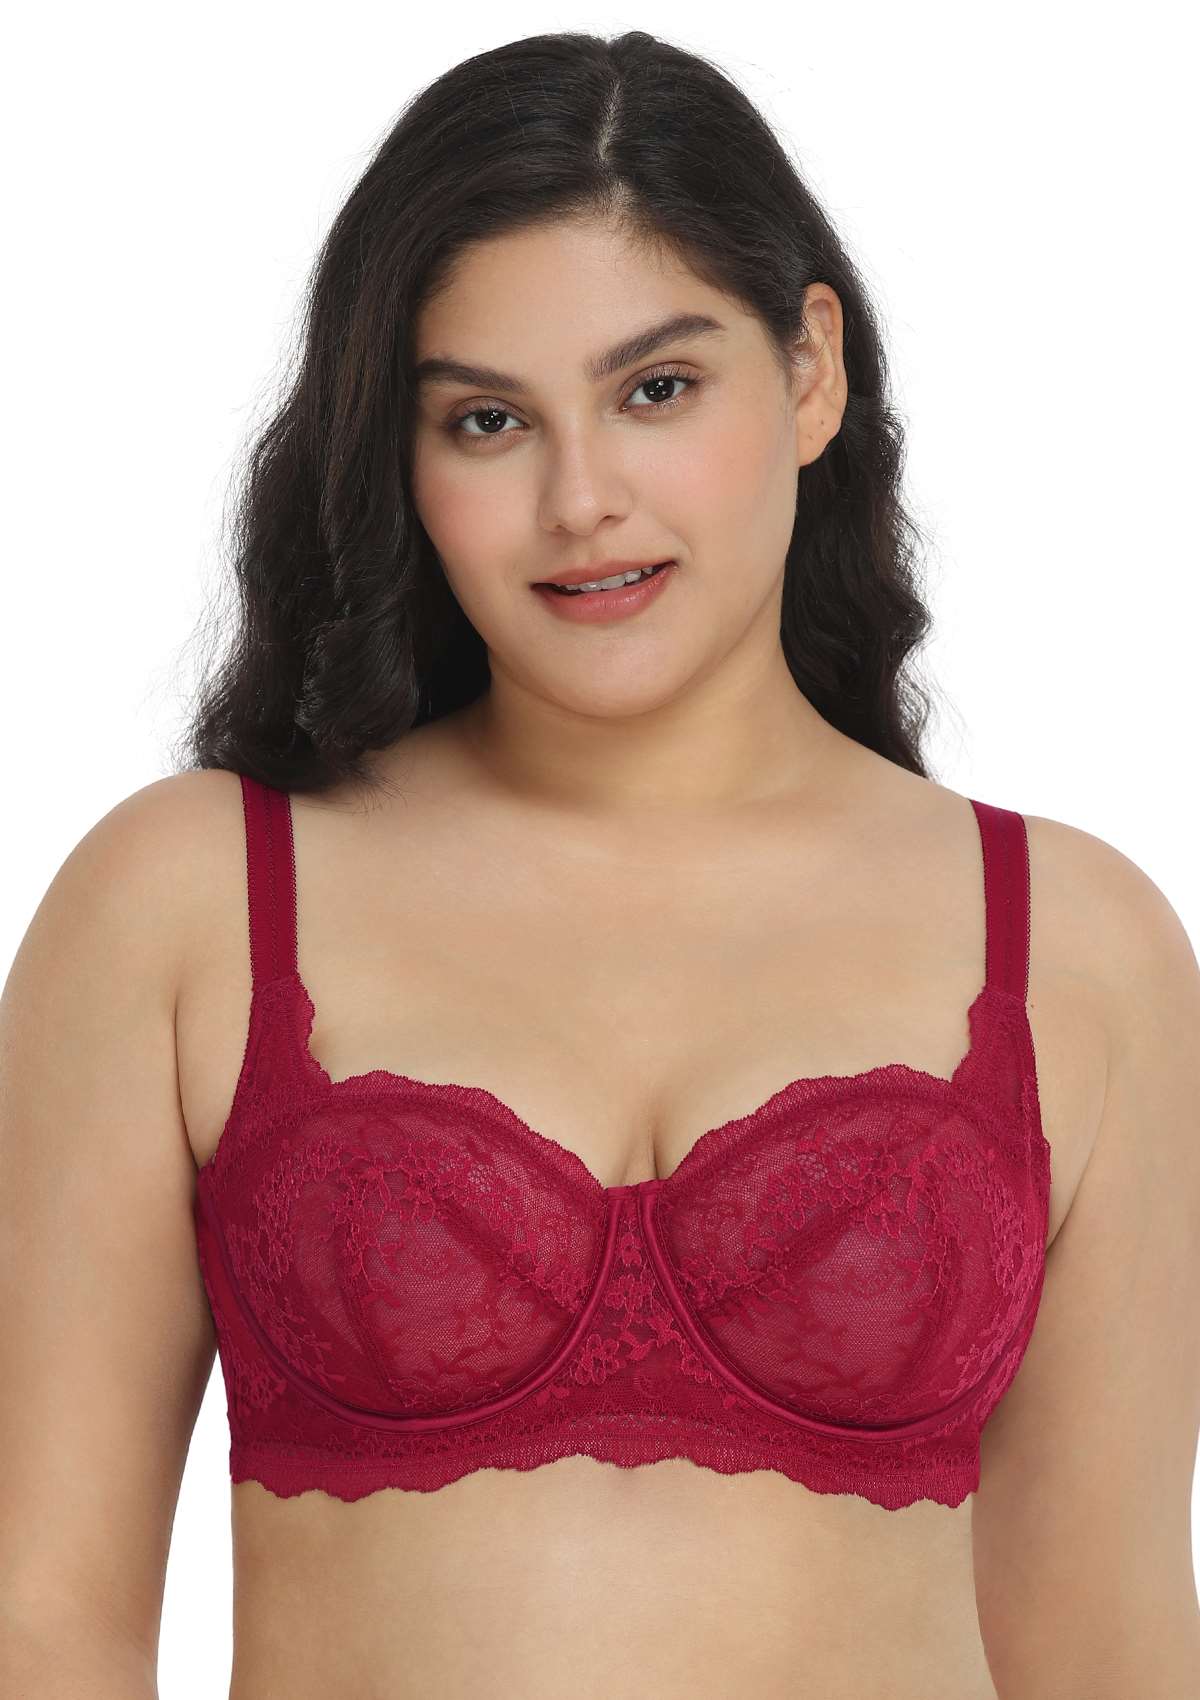 HSIA I Do Floral Lace Bridal Balconette Beautiful Bra For Special Day - Burgundy / 34 / D